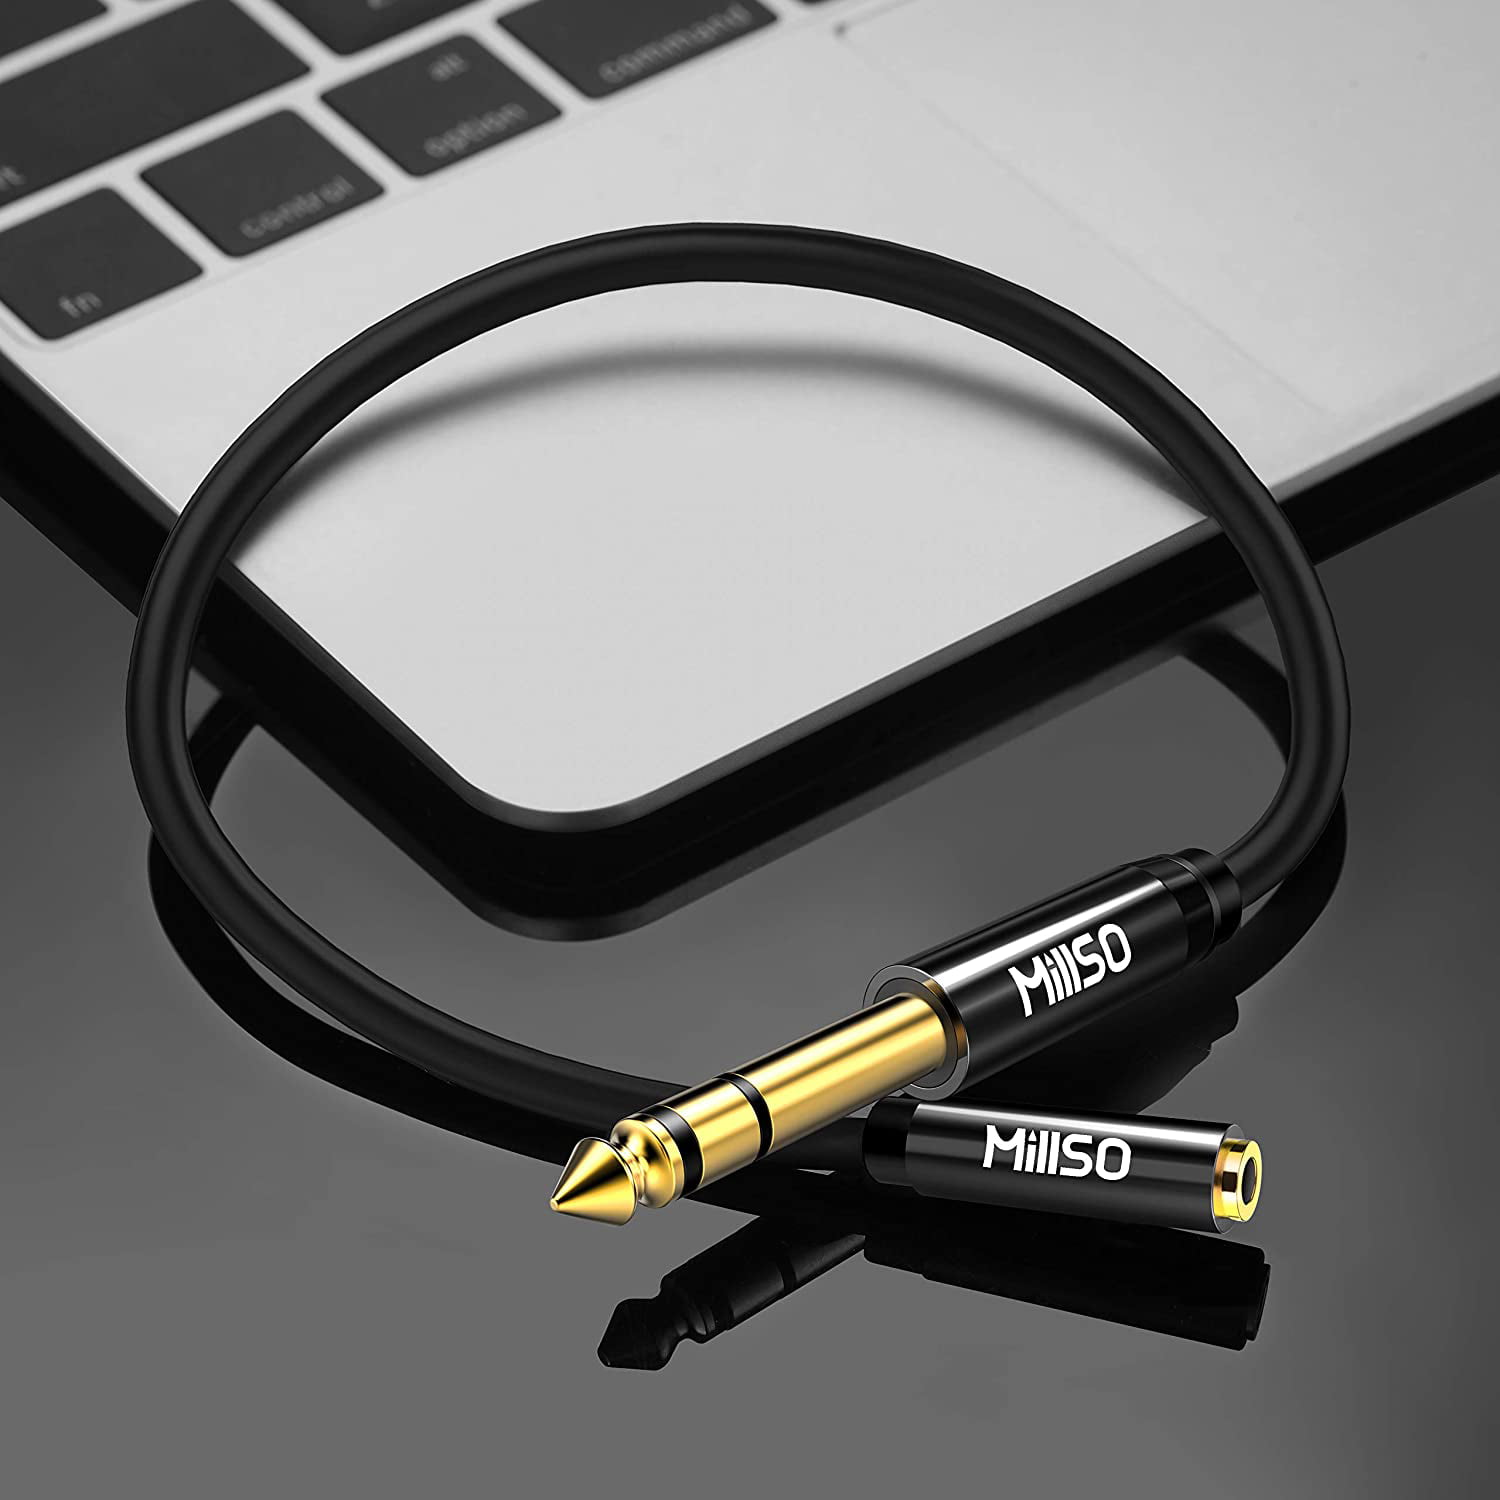 TRS Headphone Adapter 6.35mm Female to 3.5mm Male 1/8 to 1/4 Stereo Audio Adapter for Amplifier Speaker to Phone 12inch/30cm Laptop Piano Headphone Guitar MillSO 1/4 to 3.5mm Instrument Cable 